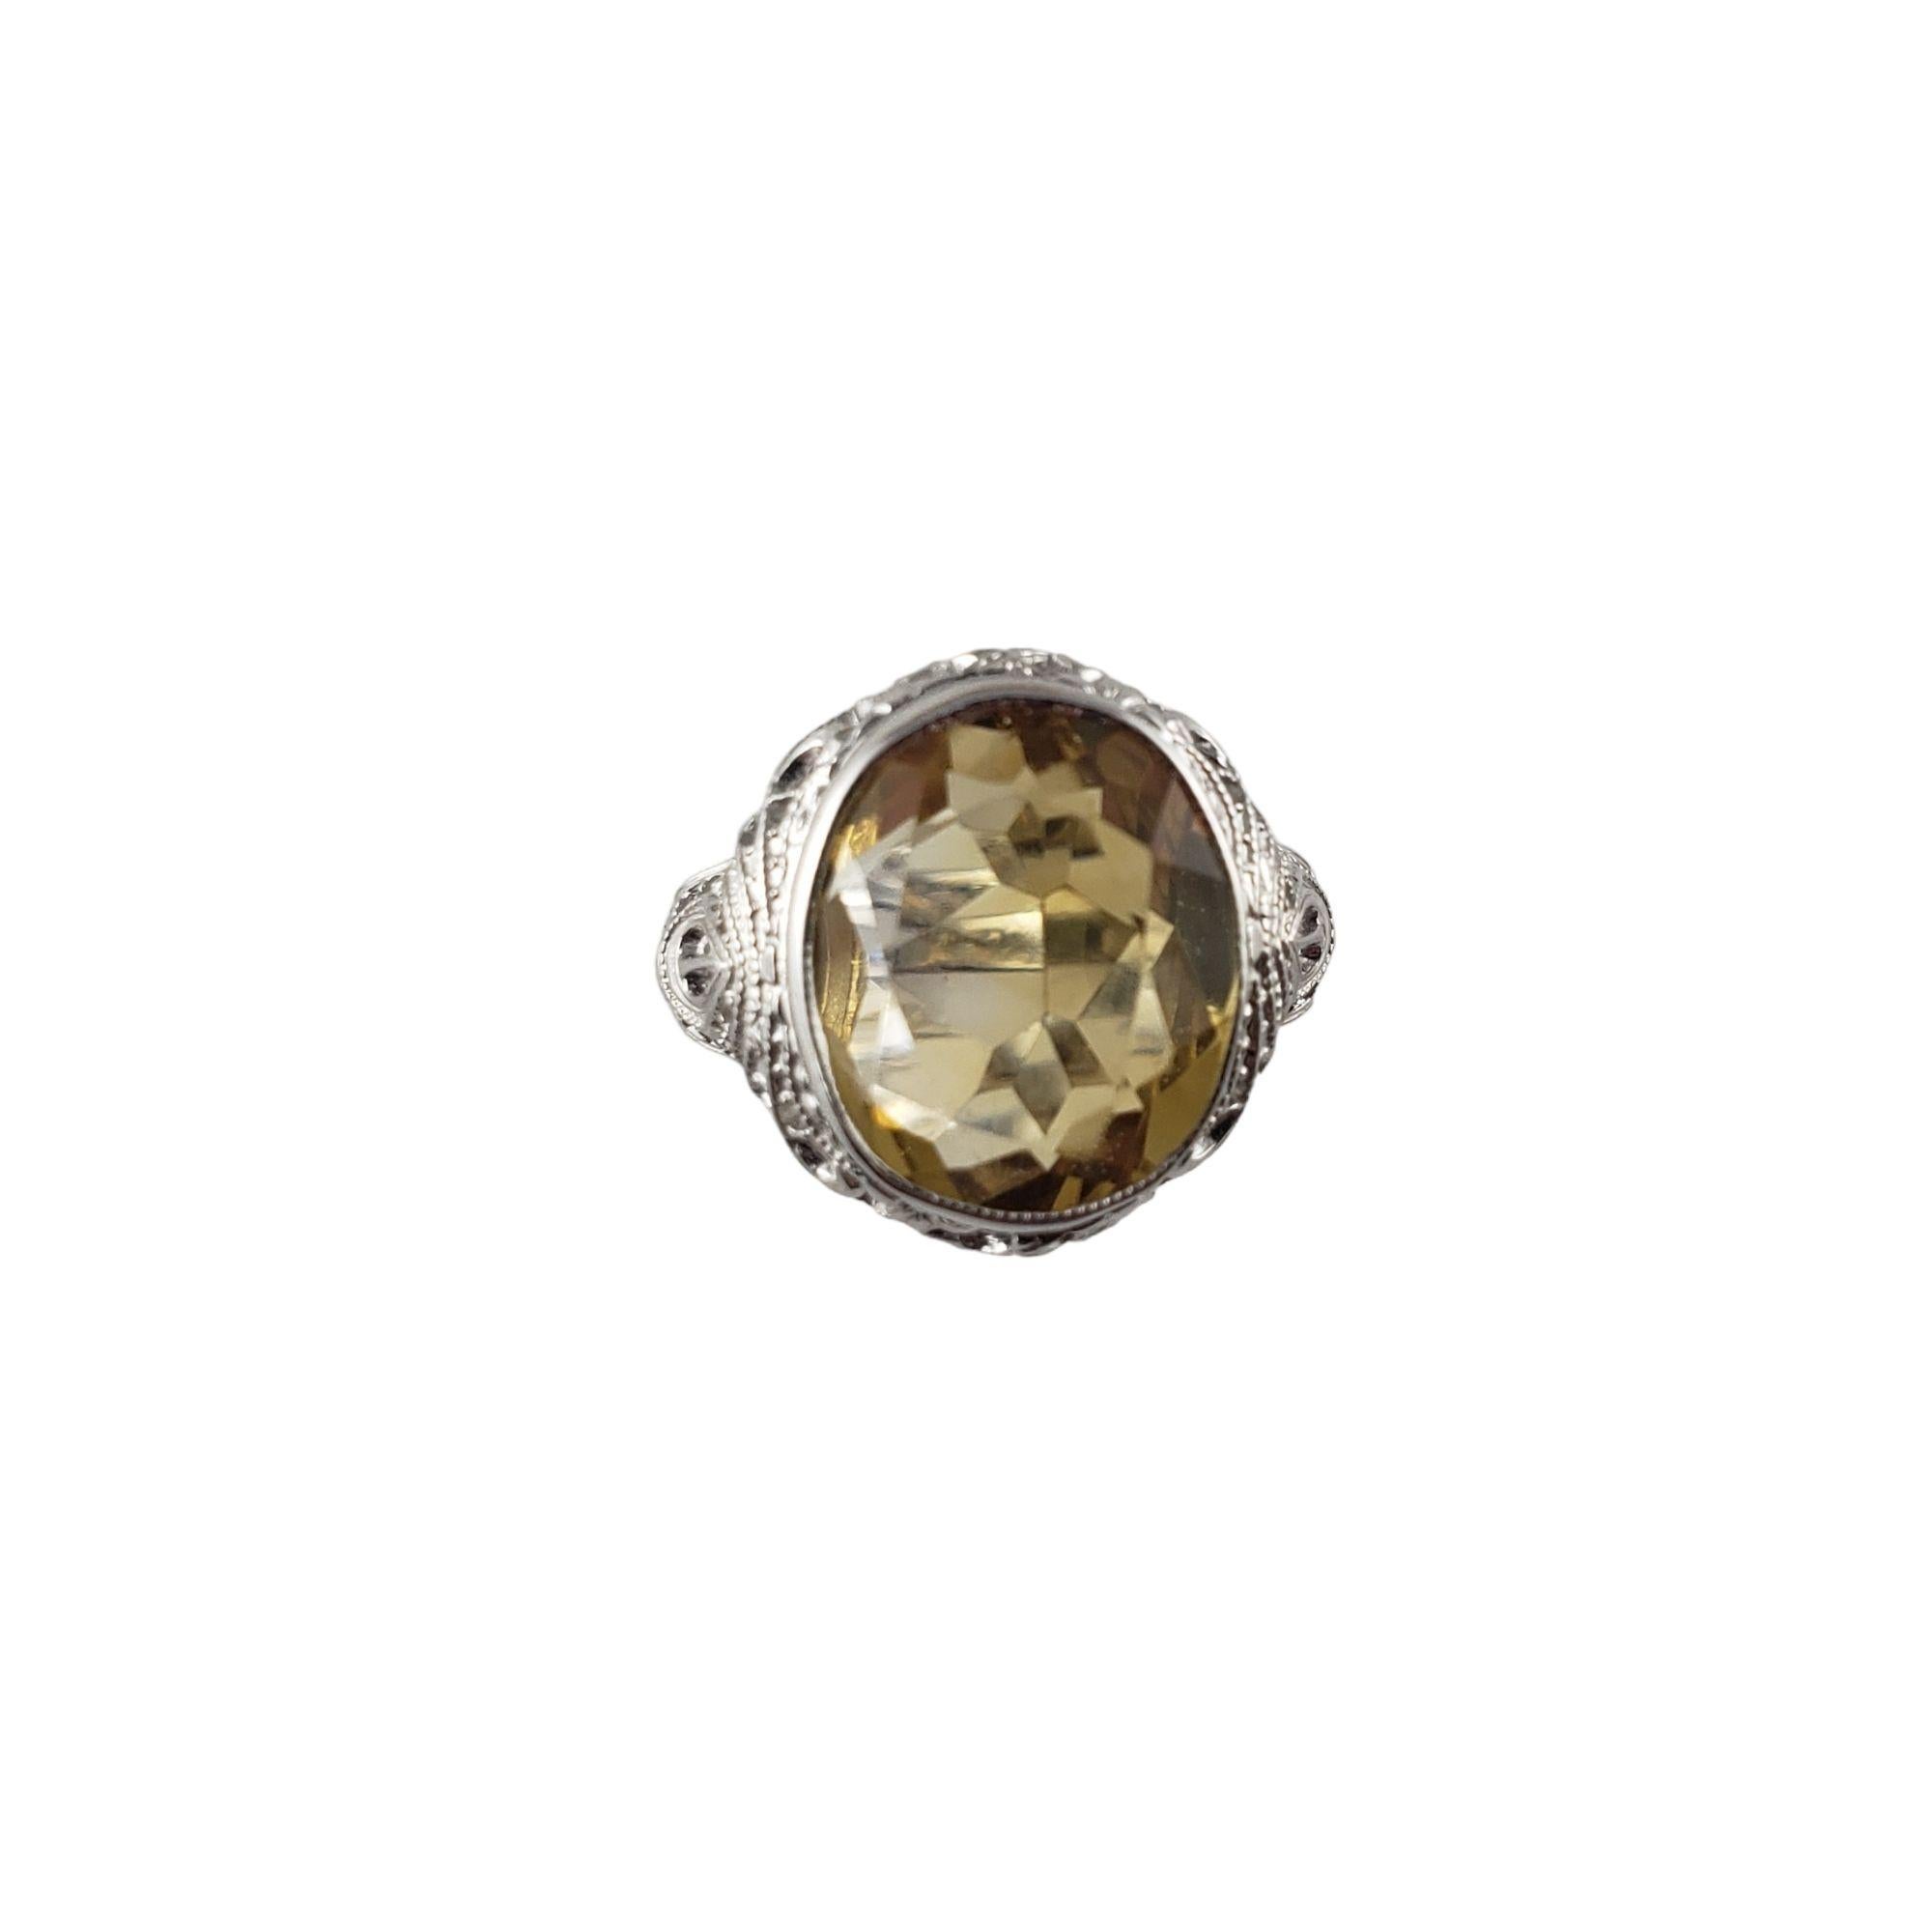 10 Karat White Gold and Citrine Ring Size 3.5 #14209 In Good Condition For Sale In Washington Depot, CT